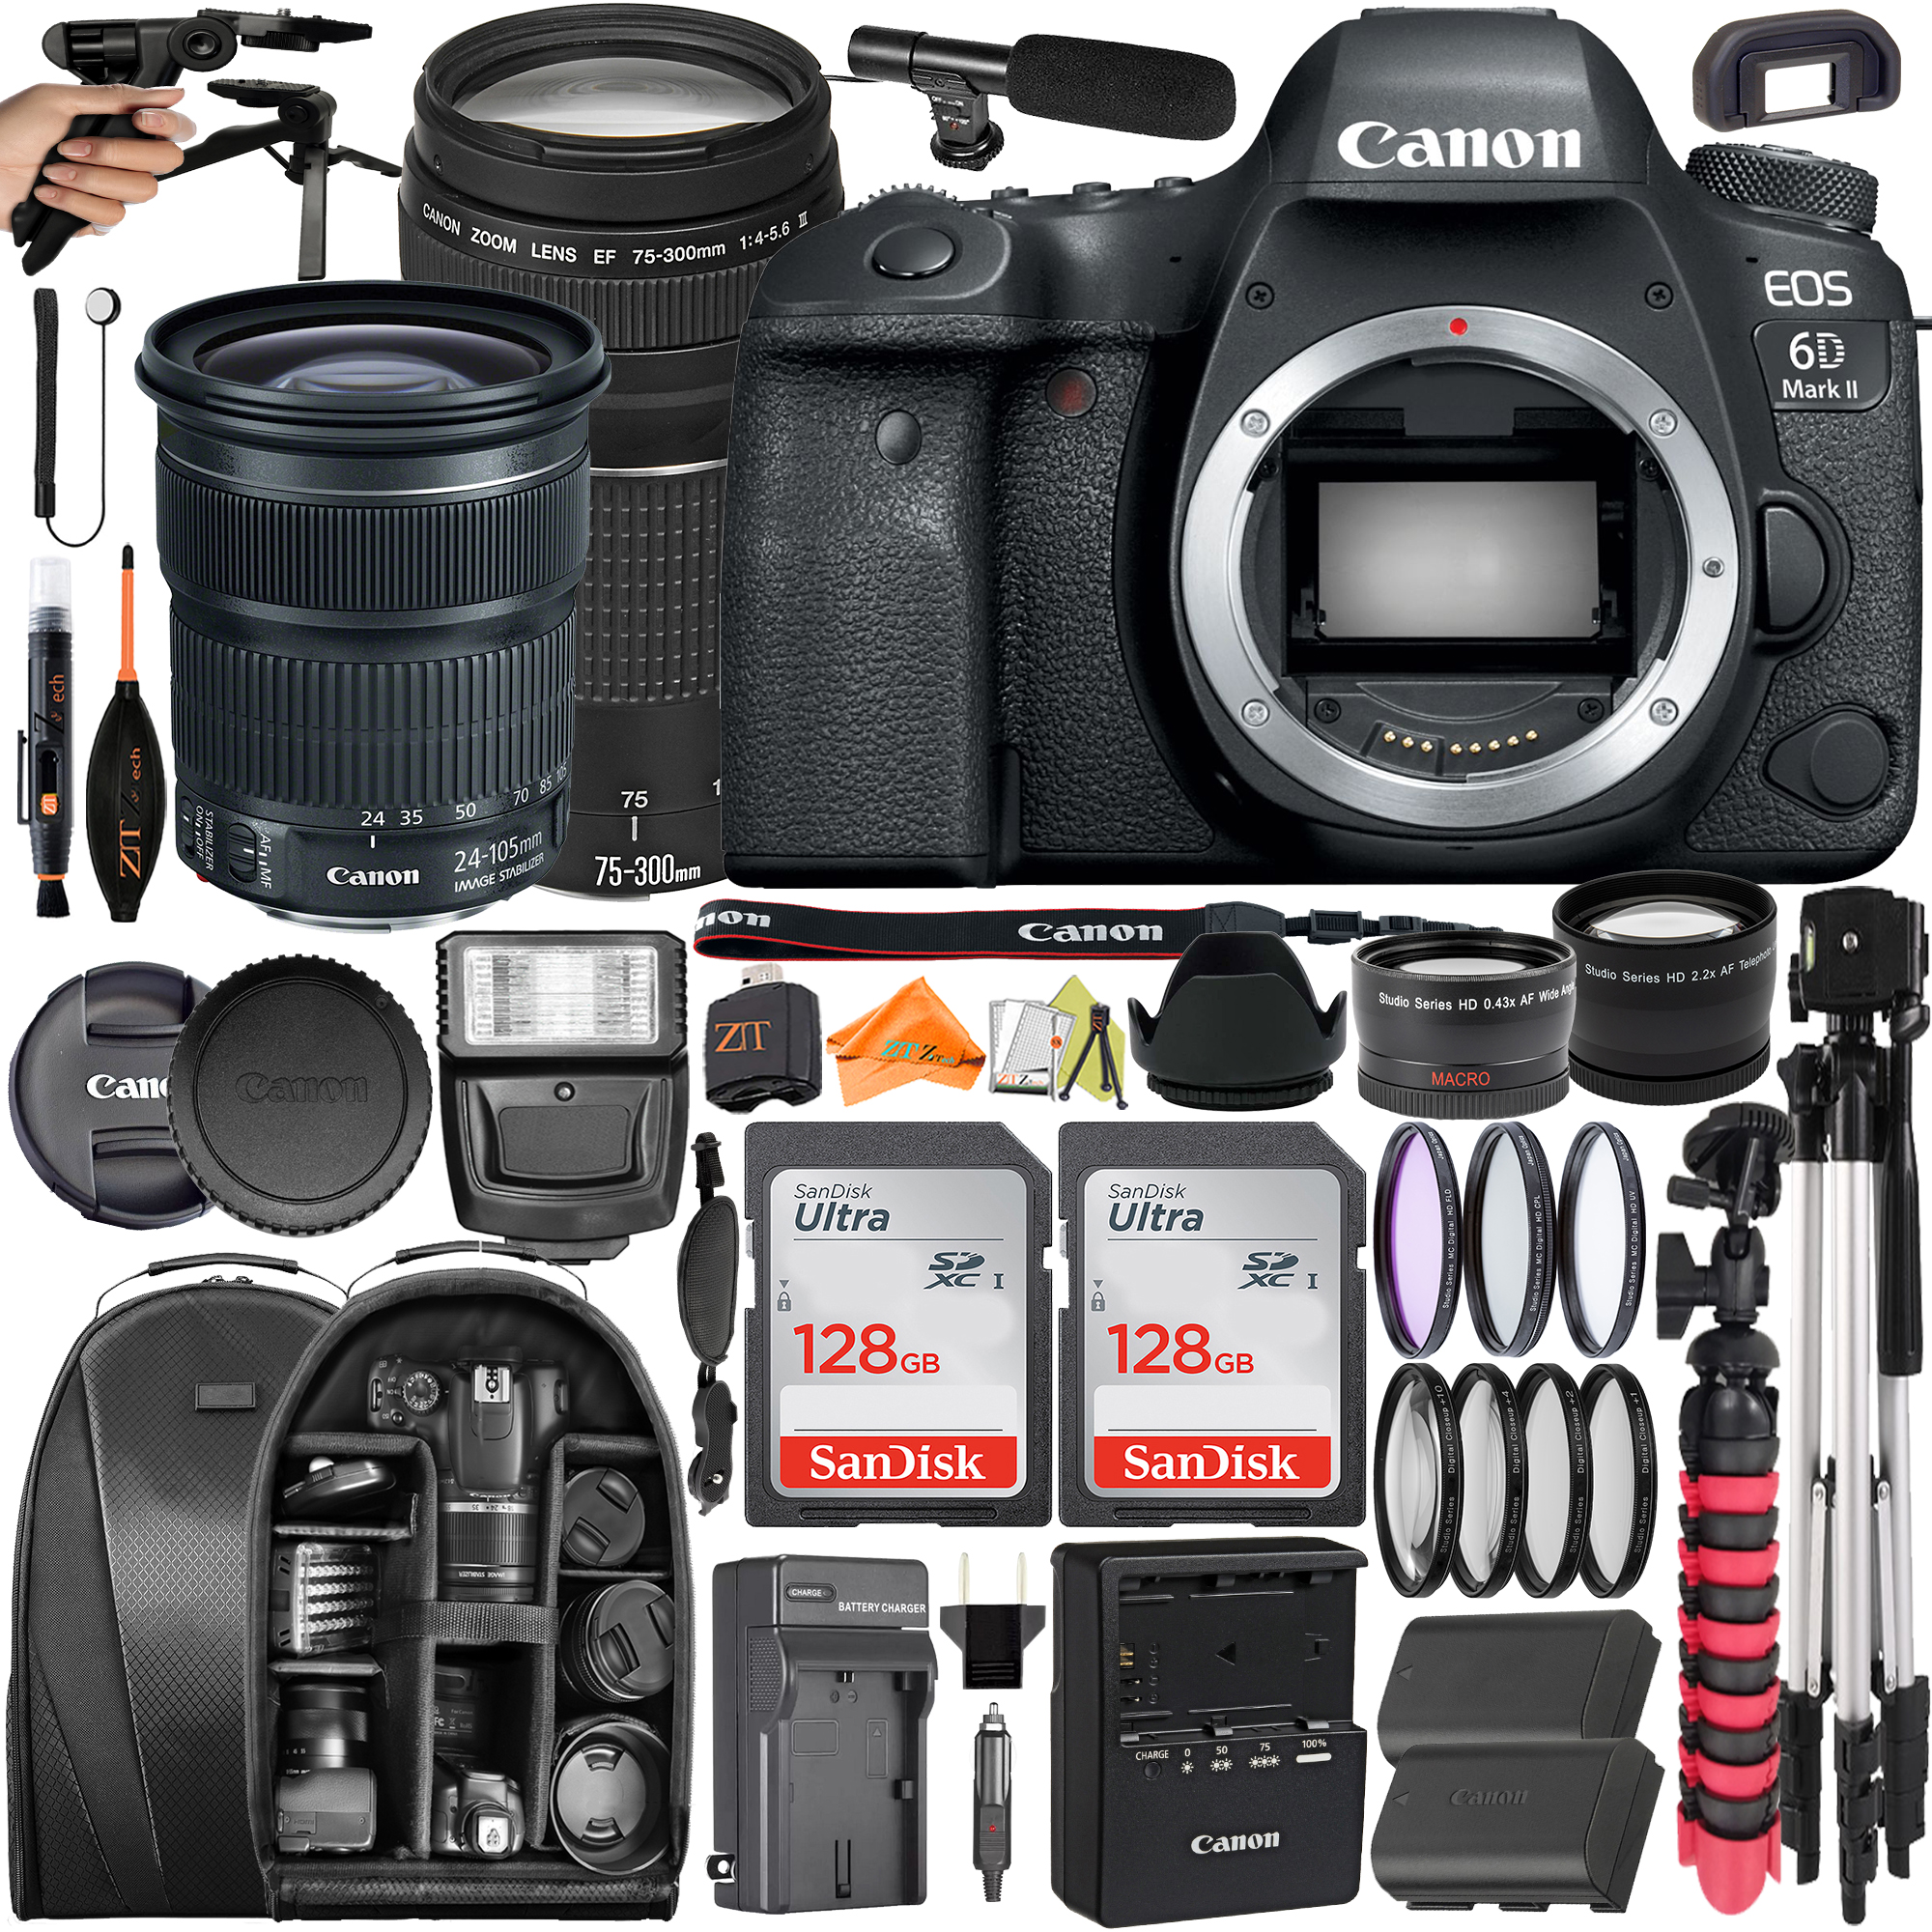 Canon EOS 6D Mark II DSLR Camera with 24-105mm + 75-300mm Lens + 2 Pack SanDisk 128GB + Backpack + ZeeTech Accessory Bundle